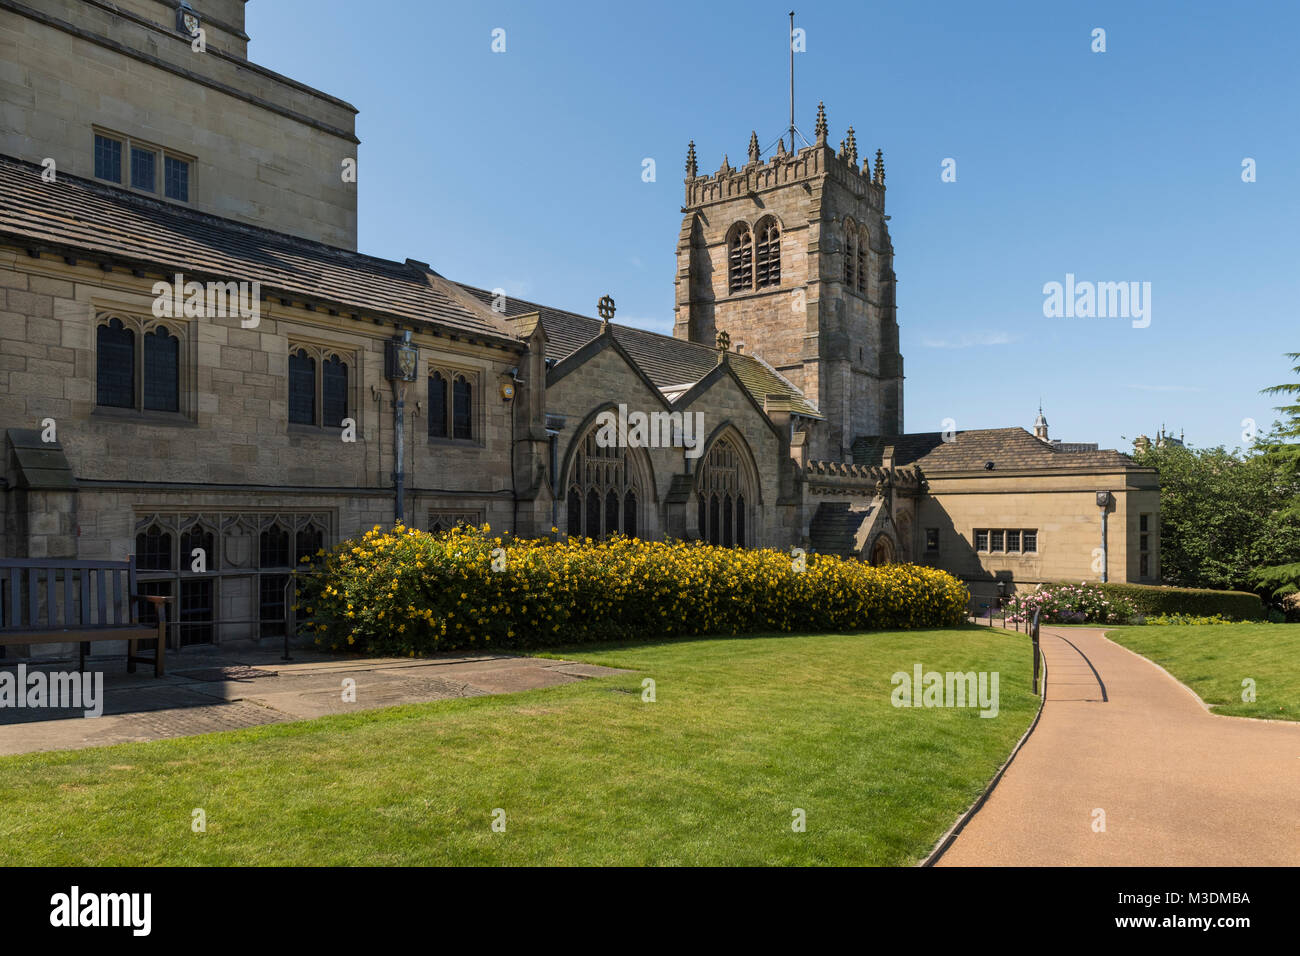 Under a deep blue sky, an exterior view of Bradford Cathedral with its squat, square tower & peaceful gardens - Bradford, West Yorkshire, England, UK. Stock Photo